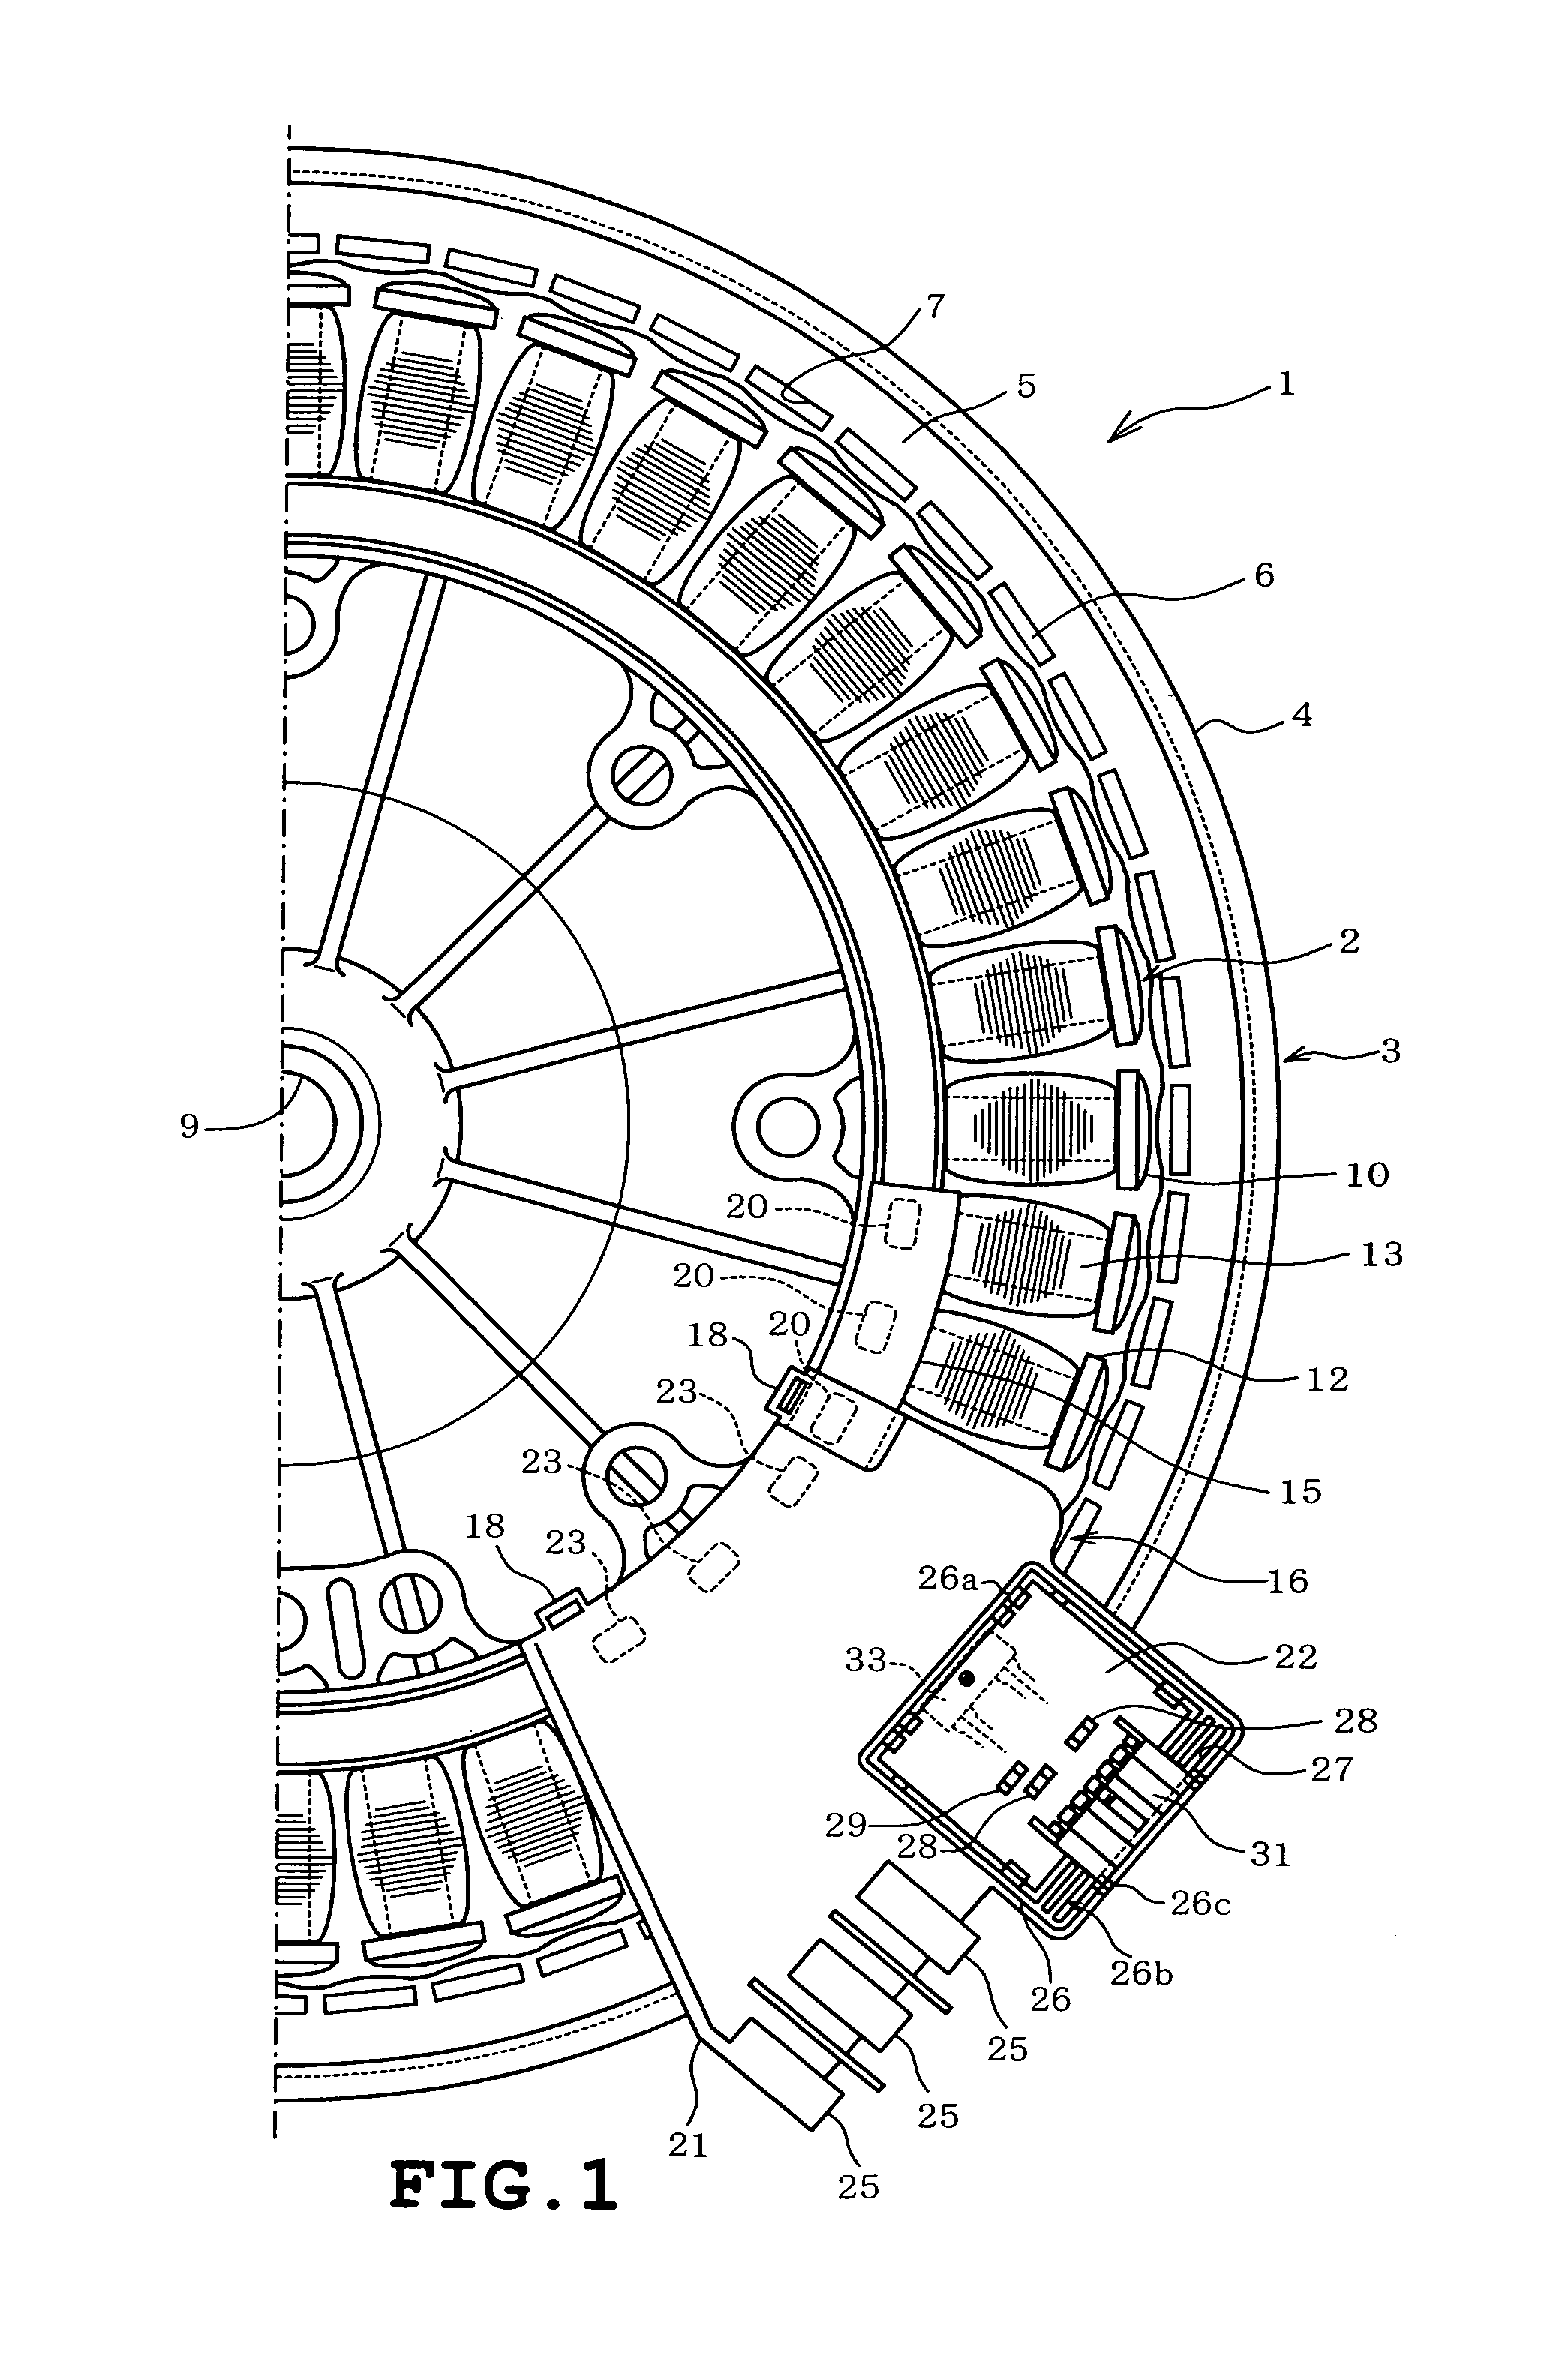 Electric motor with discrete circuit board and sensor case